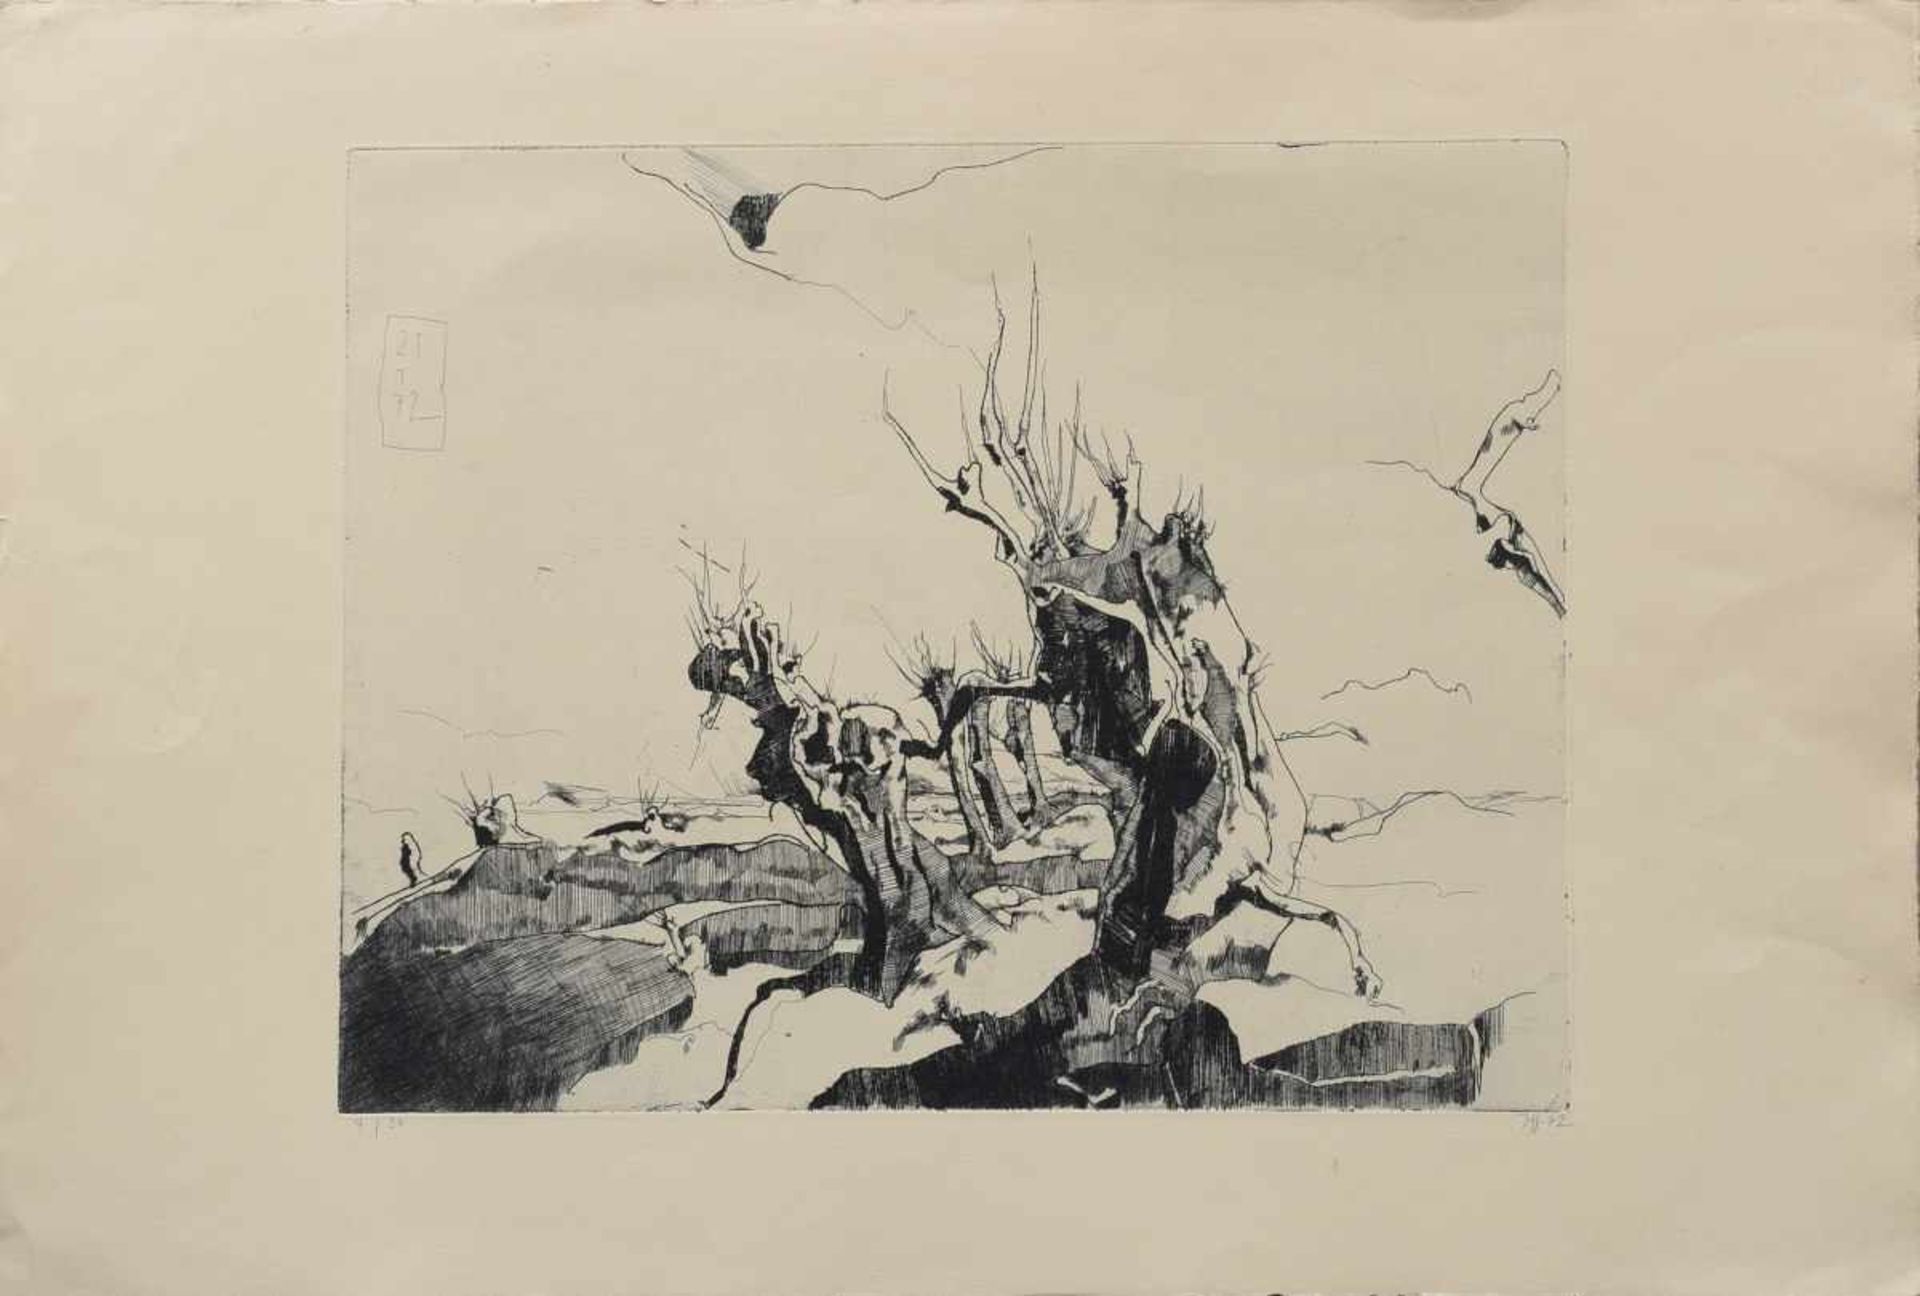 Janssen, Horst (1929-1995) "Landscape" from "7 etchings" 21.1.72, drypoint 4/30, signed and dated - Bild 2 aus 2